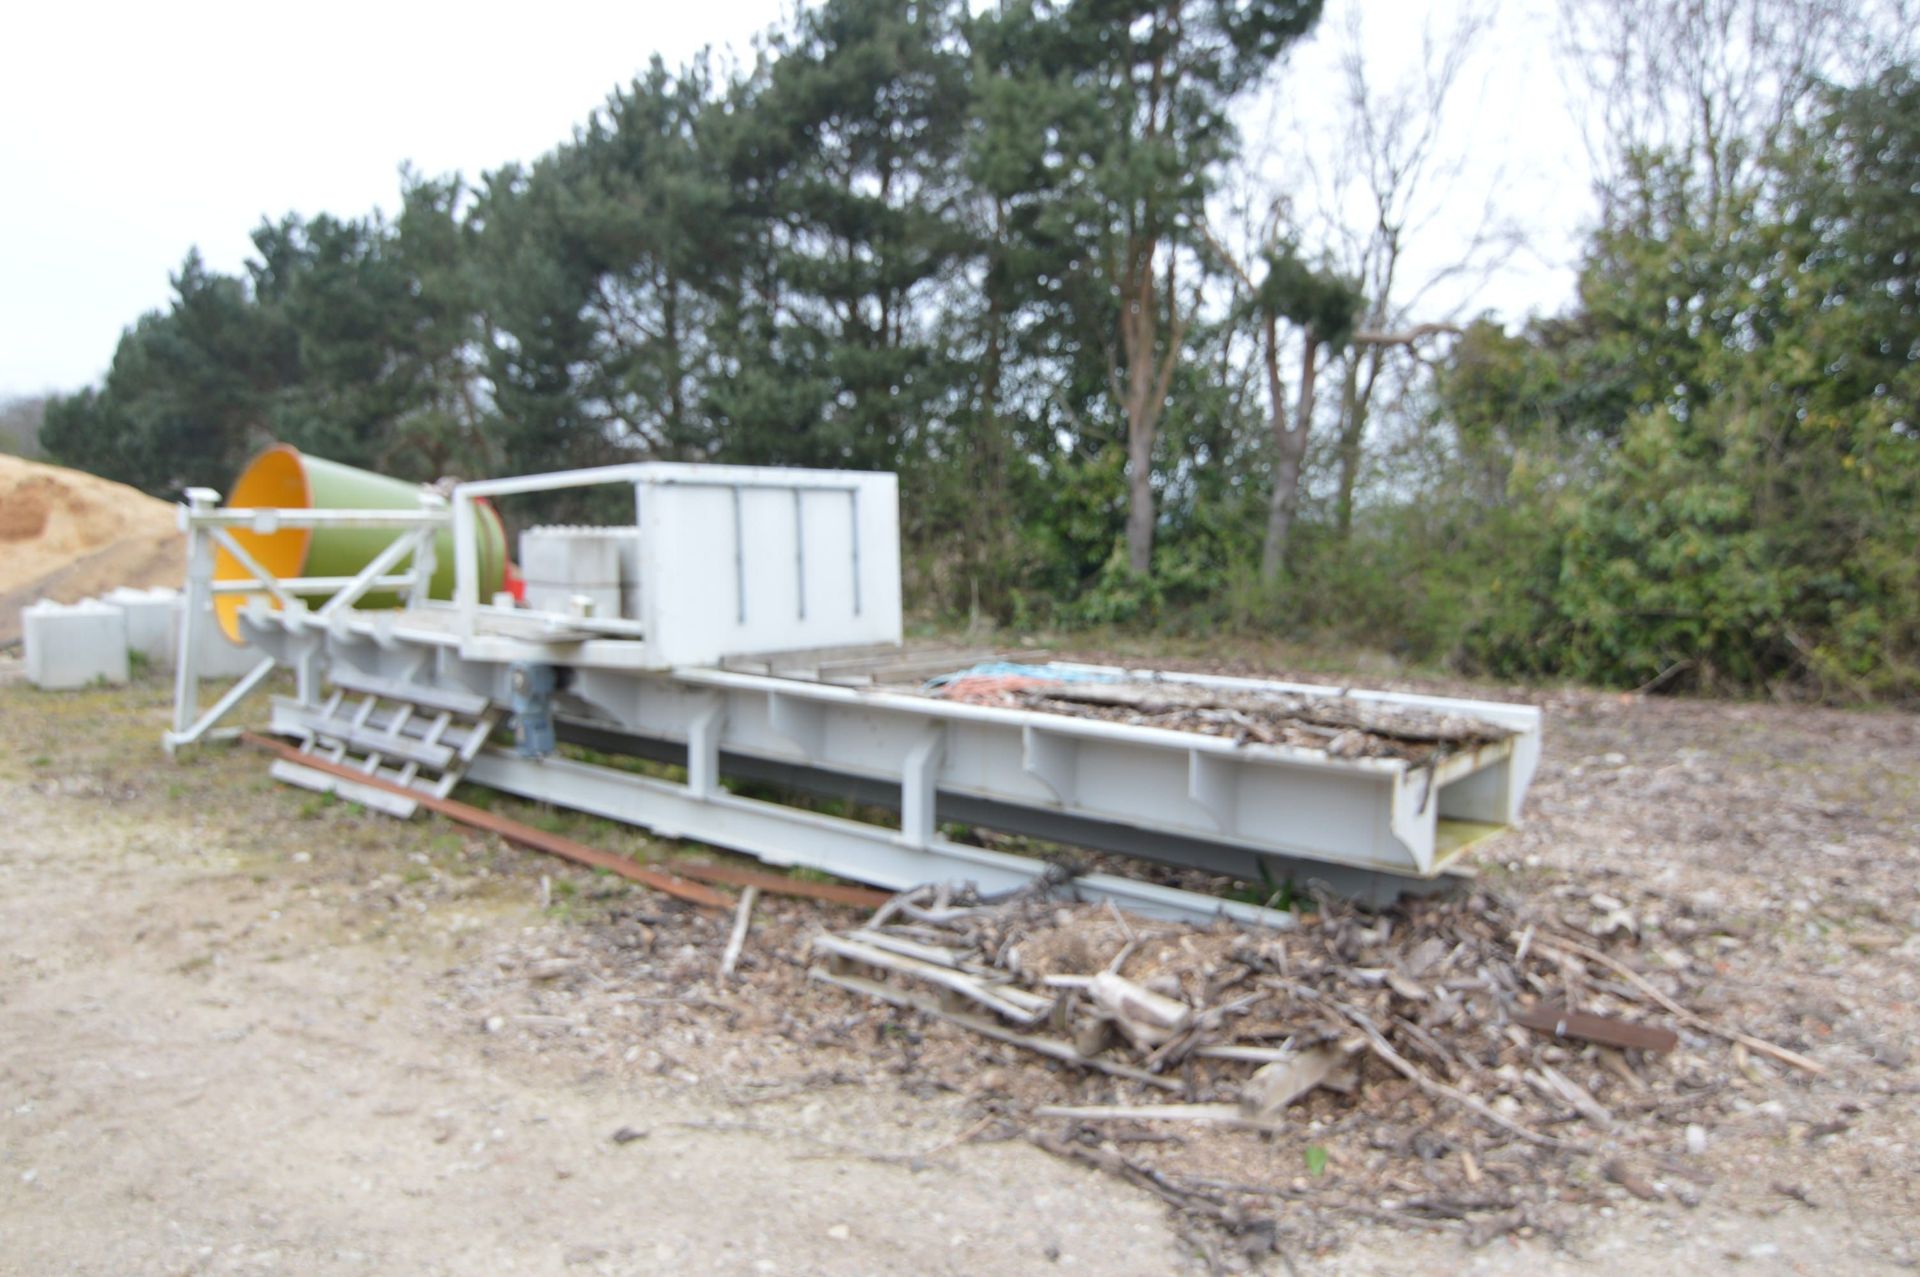 Passat STRAW BALE SHREDDER, with hopper, steel frame supports and conveyor feed unit (no chain), - Image 11 of 14